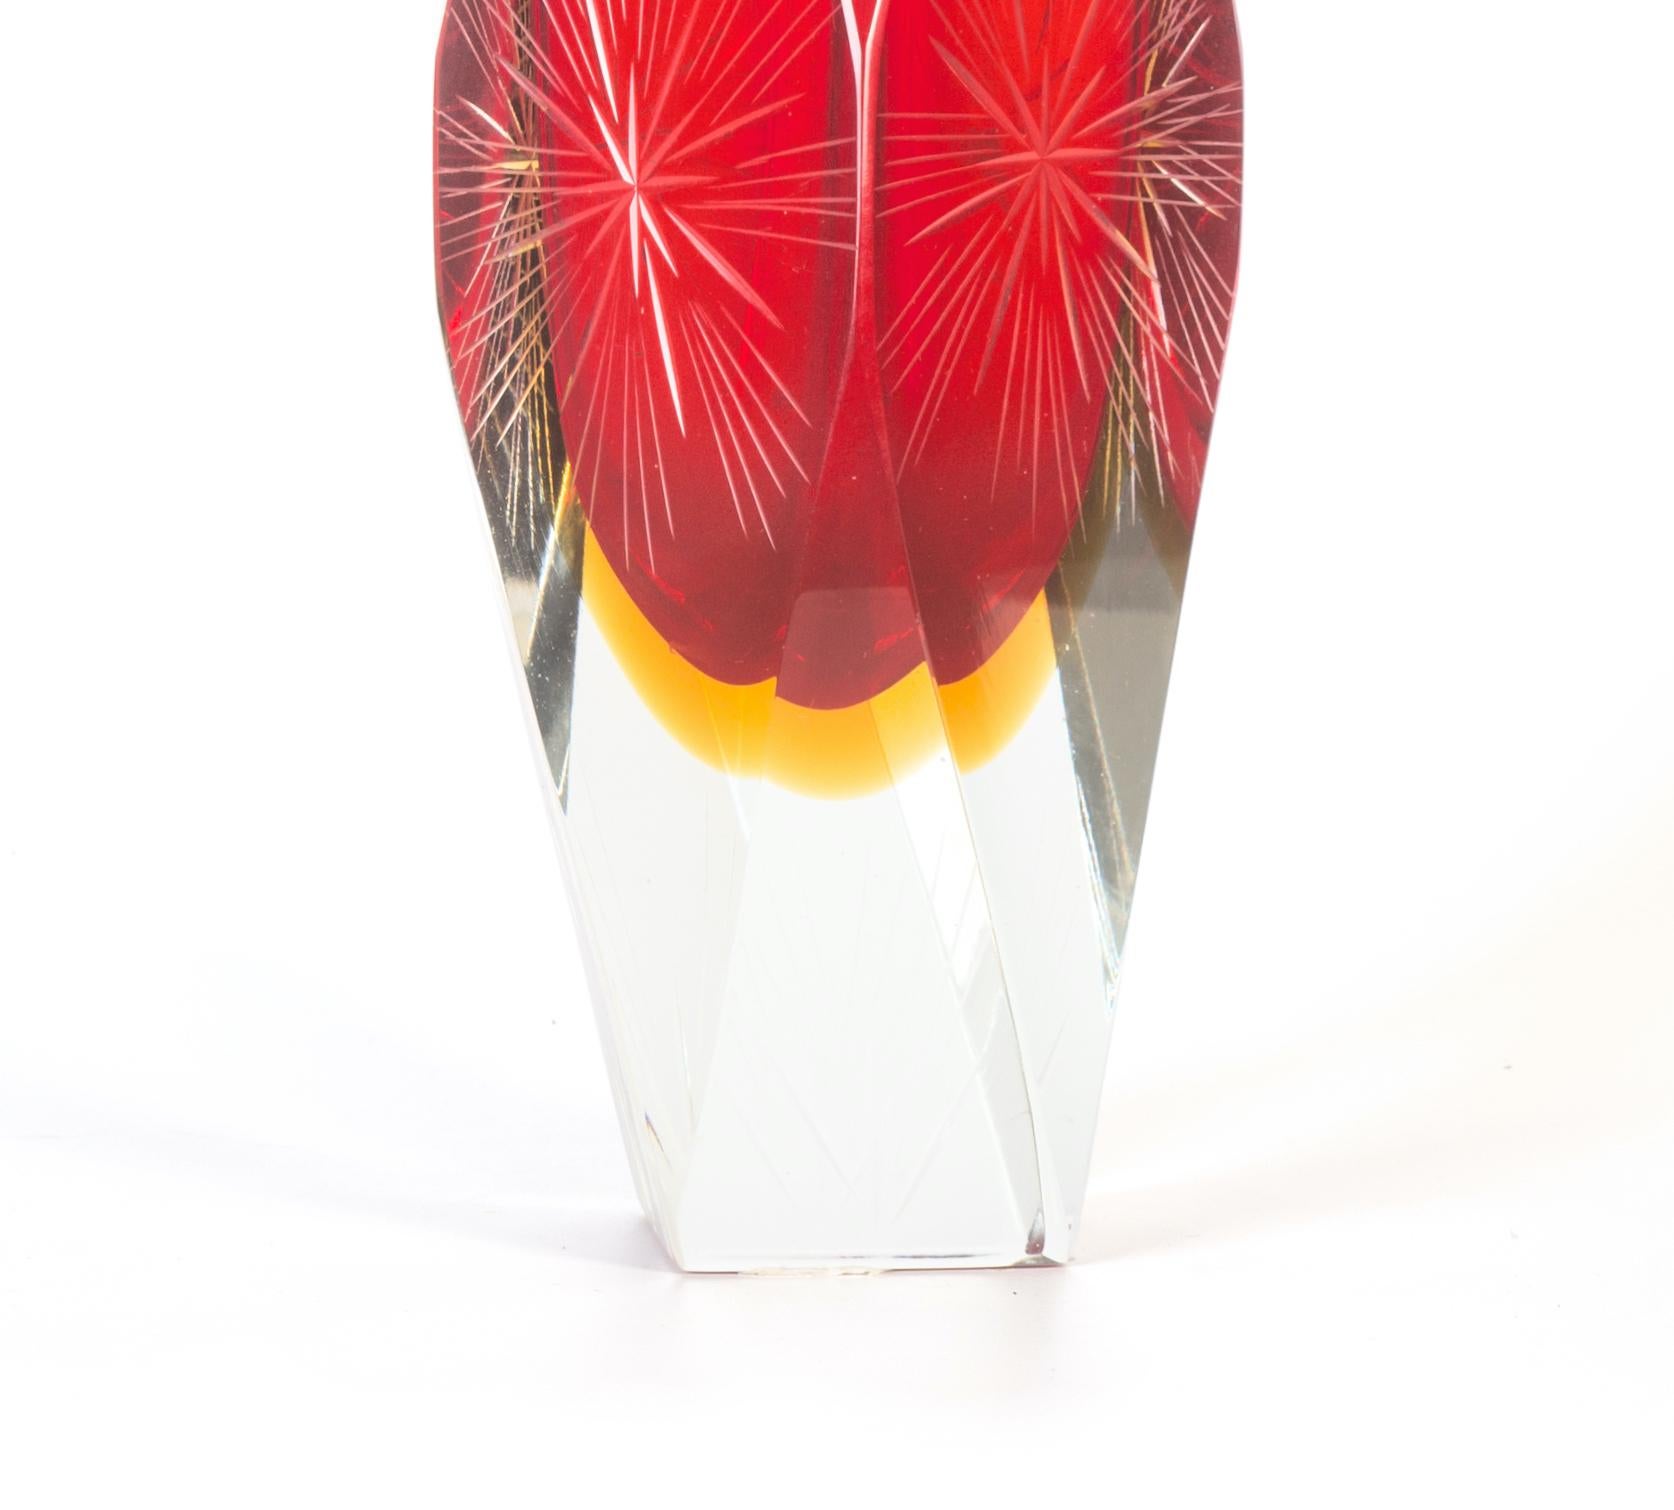 Red crystal vase is a beautiful crystal decorative object, realized by an italian manufacture during the 1970s.

Very fashionable red colored multifaceted vase with elegant star shaped decorations along the body.

Good conditions.